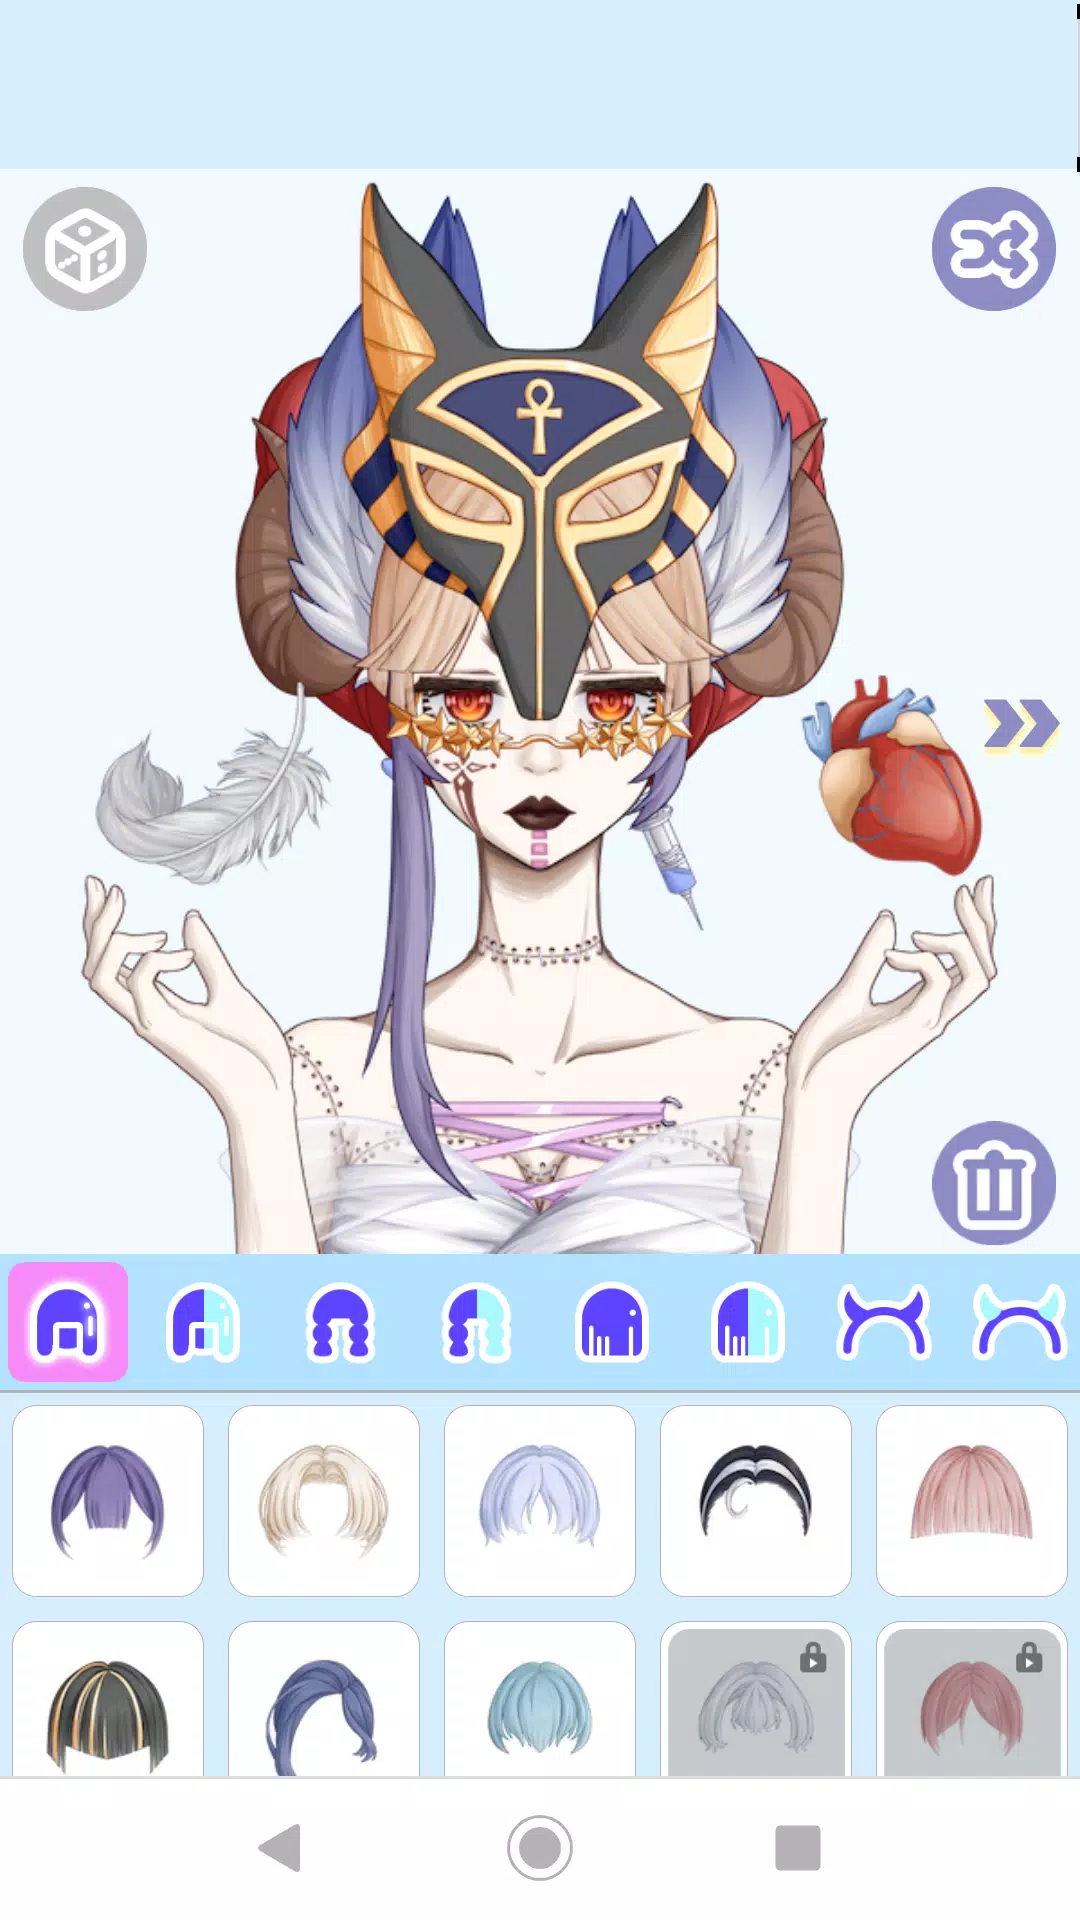 Avatar Maker: Anime Apk Download for Android- Latest version 3.6.6